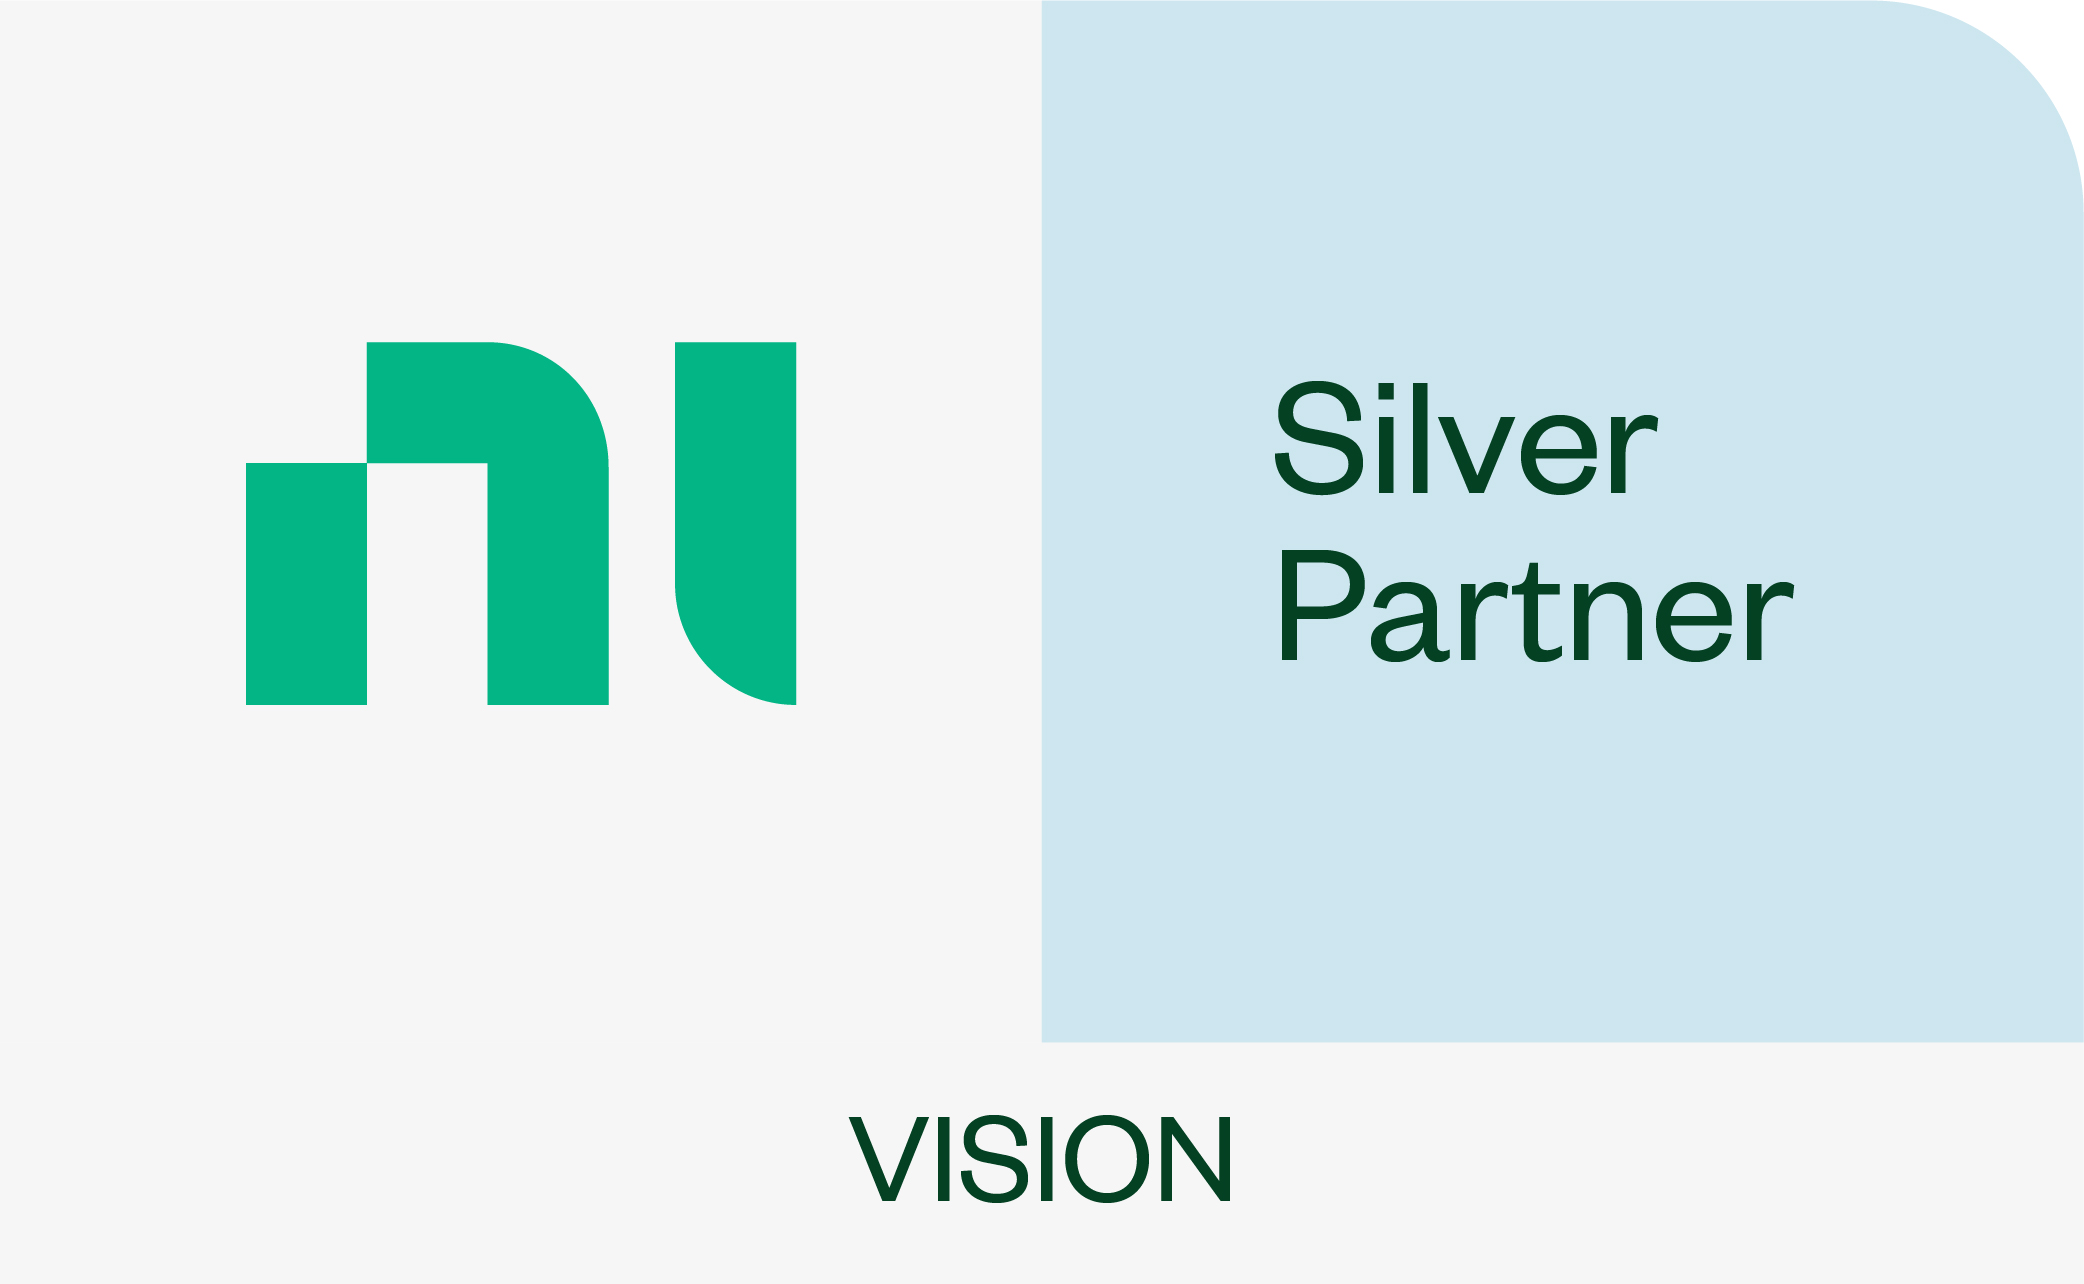 National Instruments Silver Alliance Partner - Vision Specialty Badge